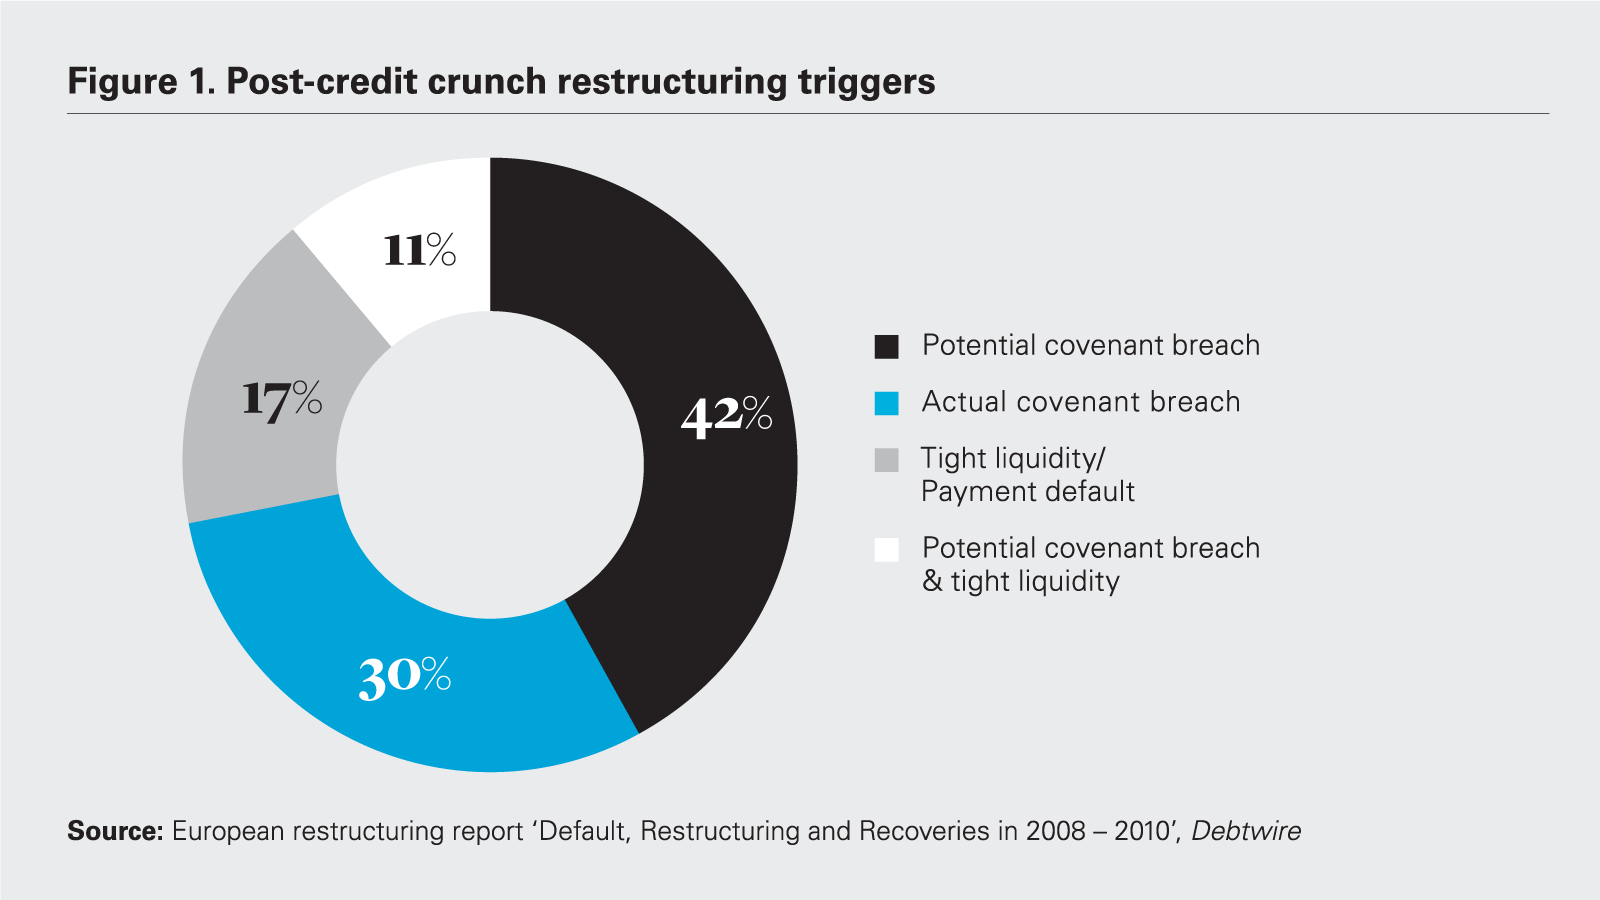 Post-credit crunch restructuring triggers chart